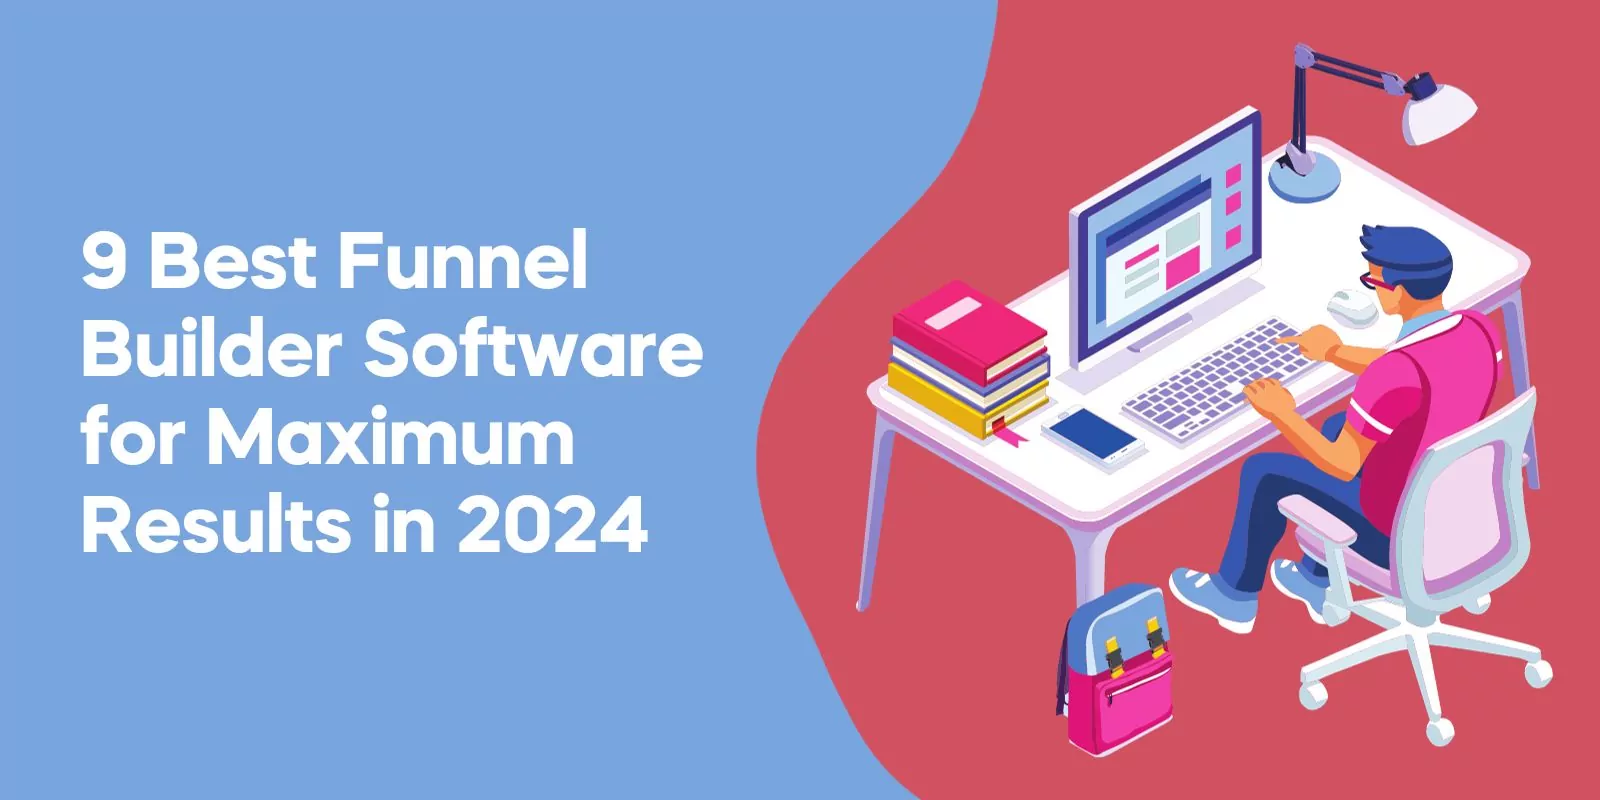 jeremy-mcgilvrey-shared-9 best funnel builder software for maximum results in 2024